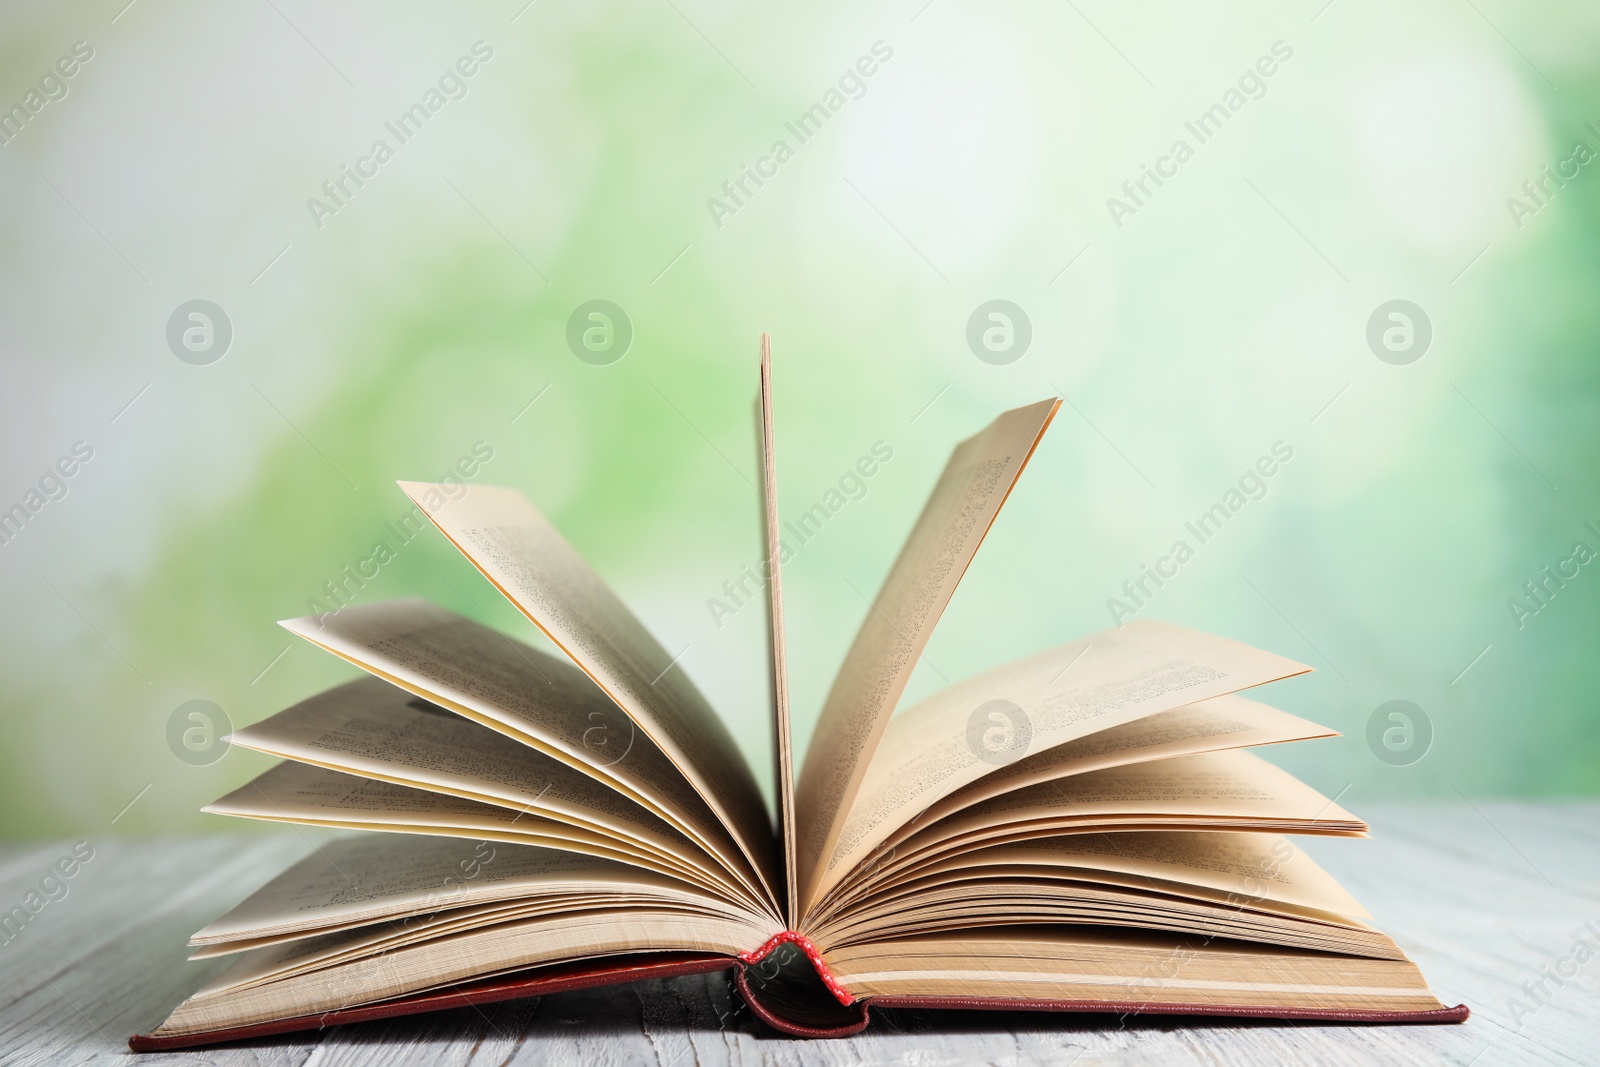 Photo of Open book on white wooden table against blurred green background